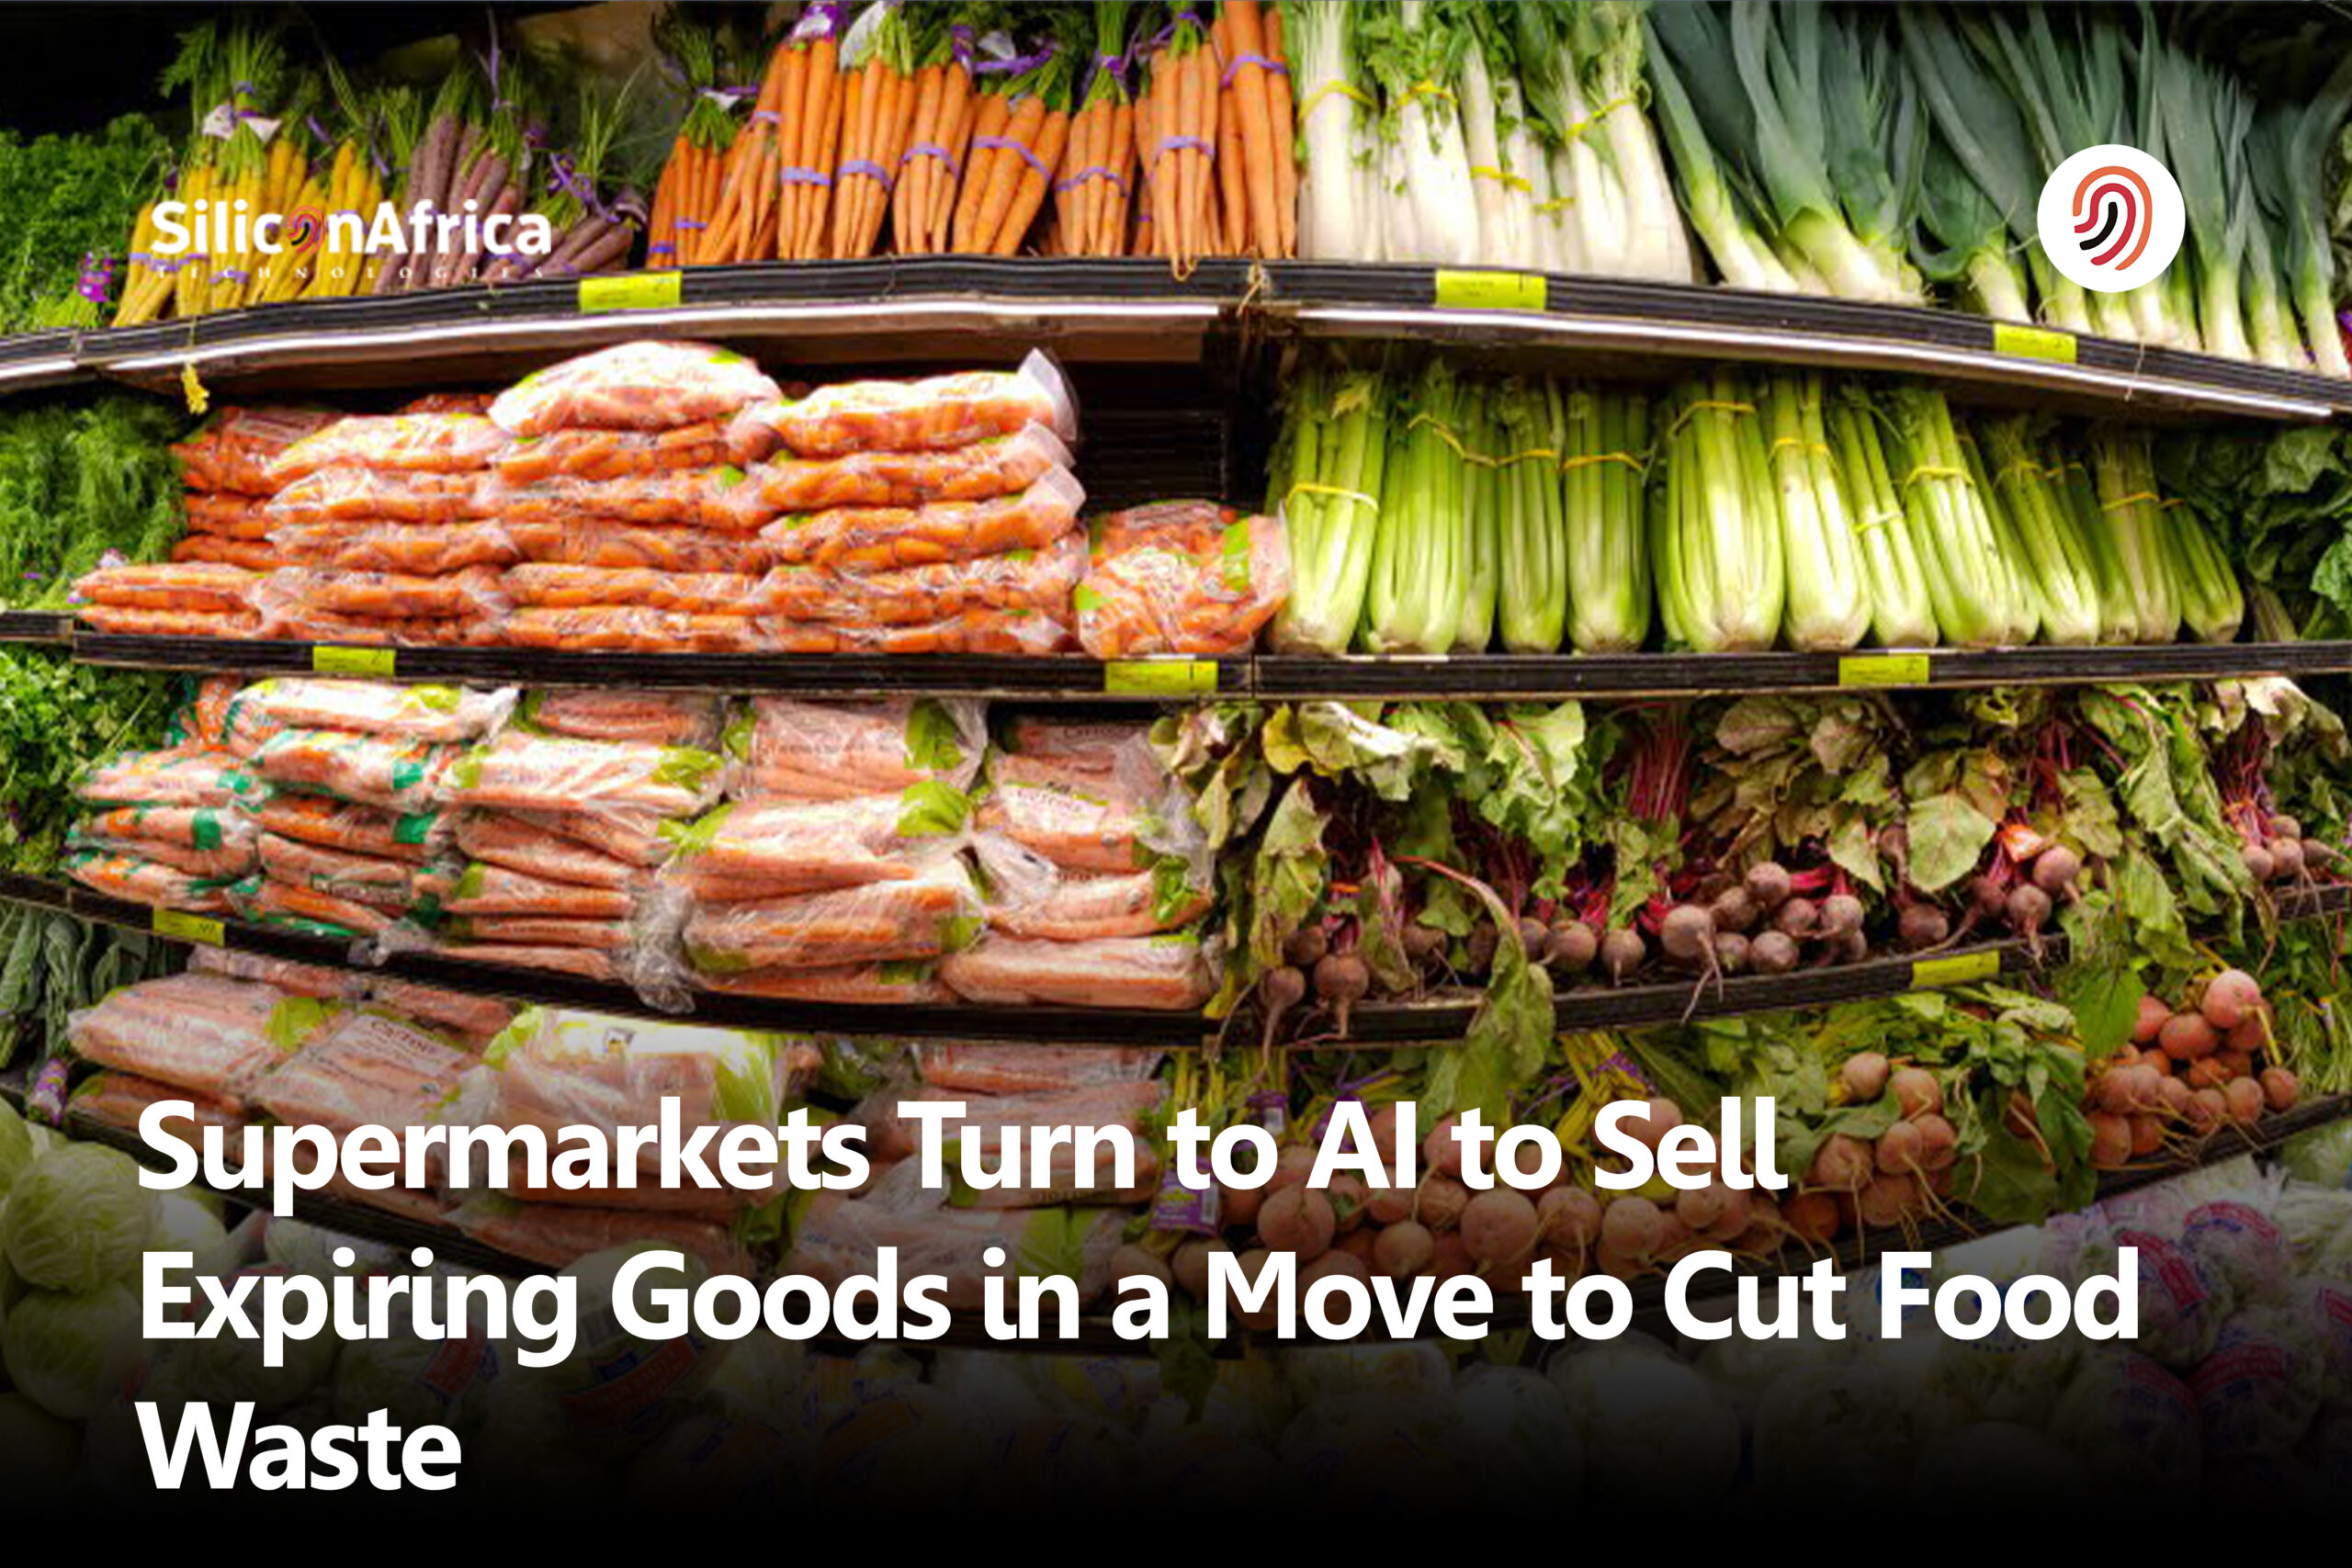 Supermarkets Turn to AI to Sell Expiring Goods in a Move to Cut Food Waste